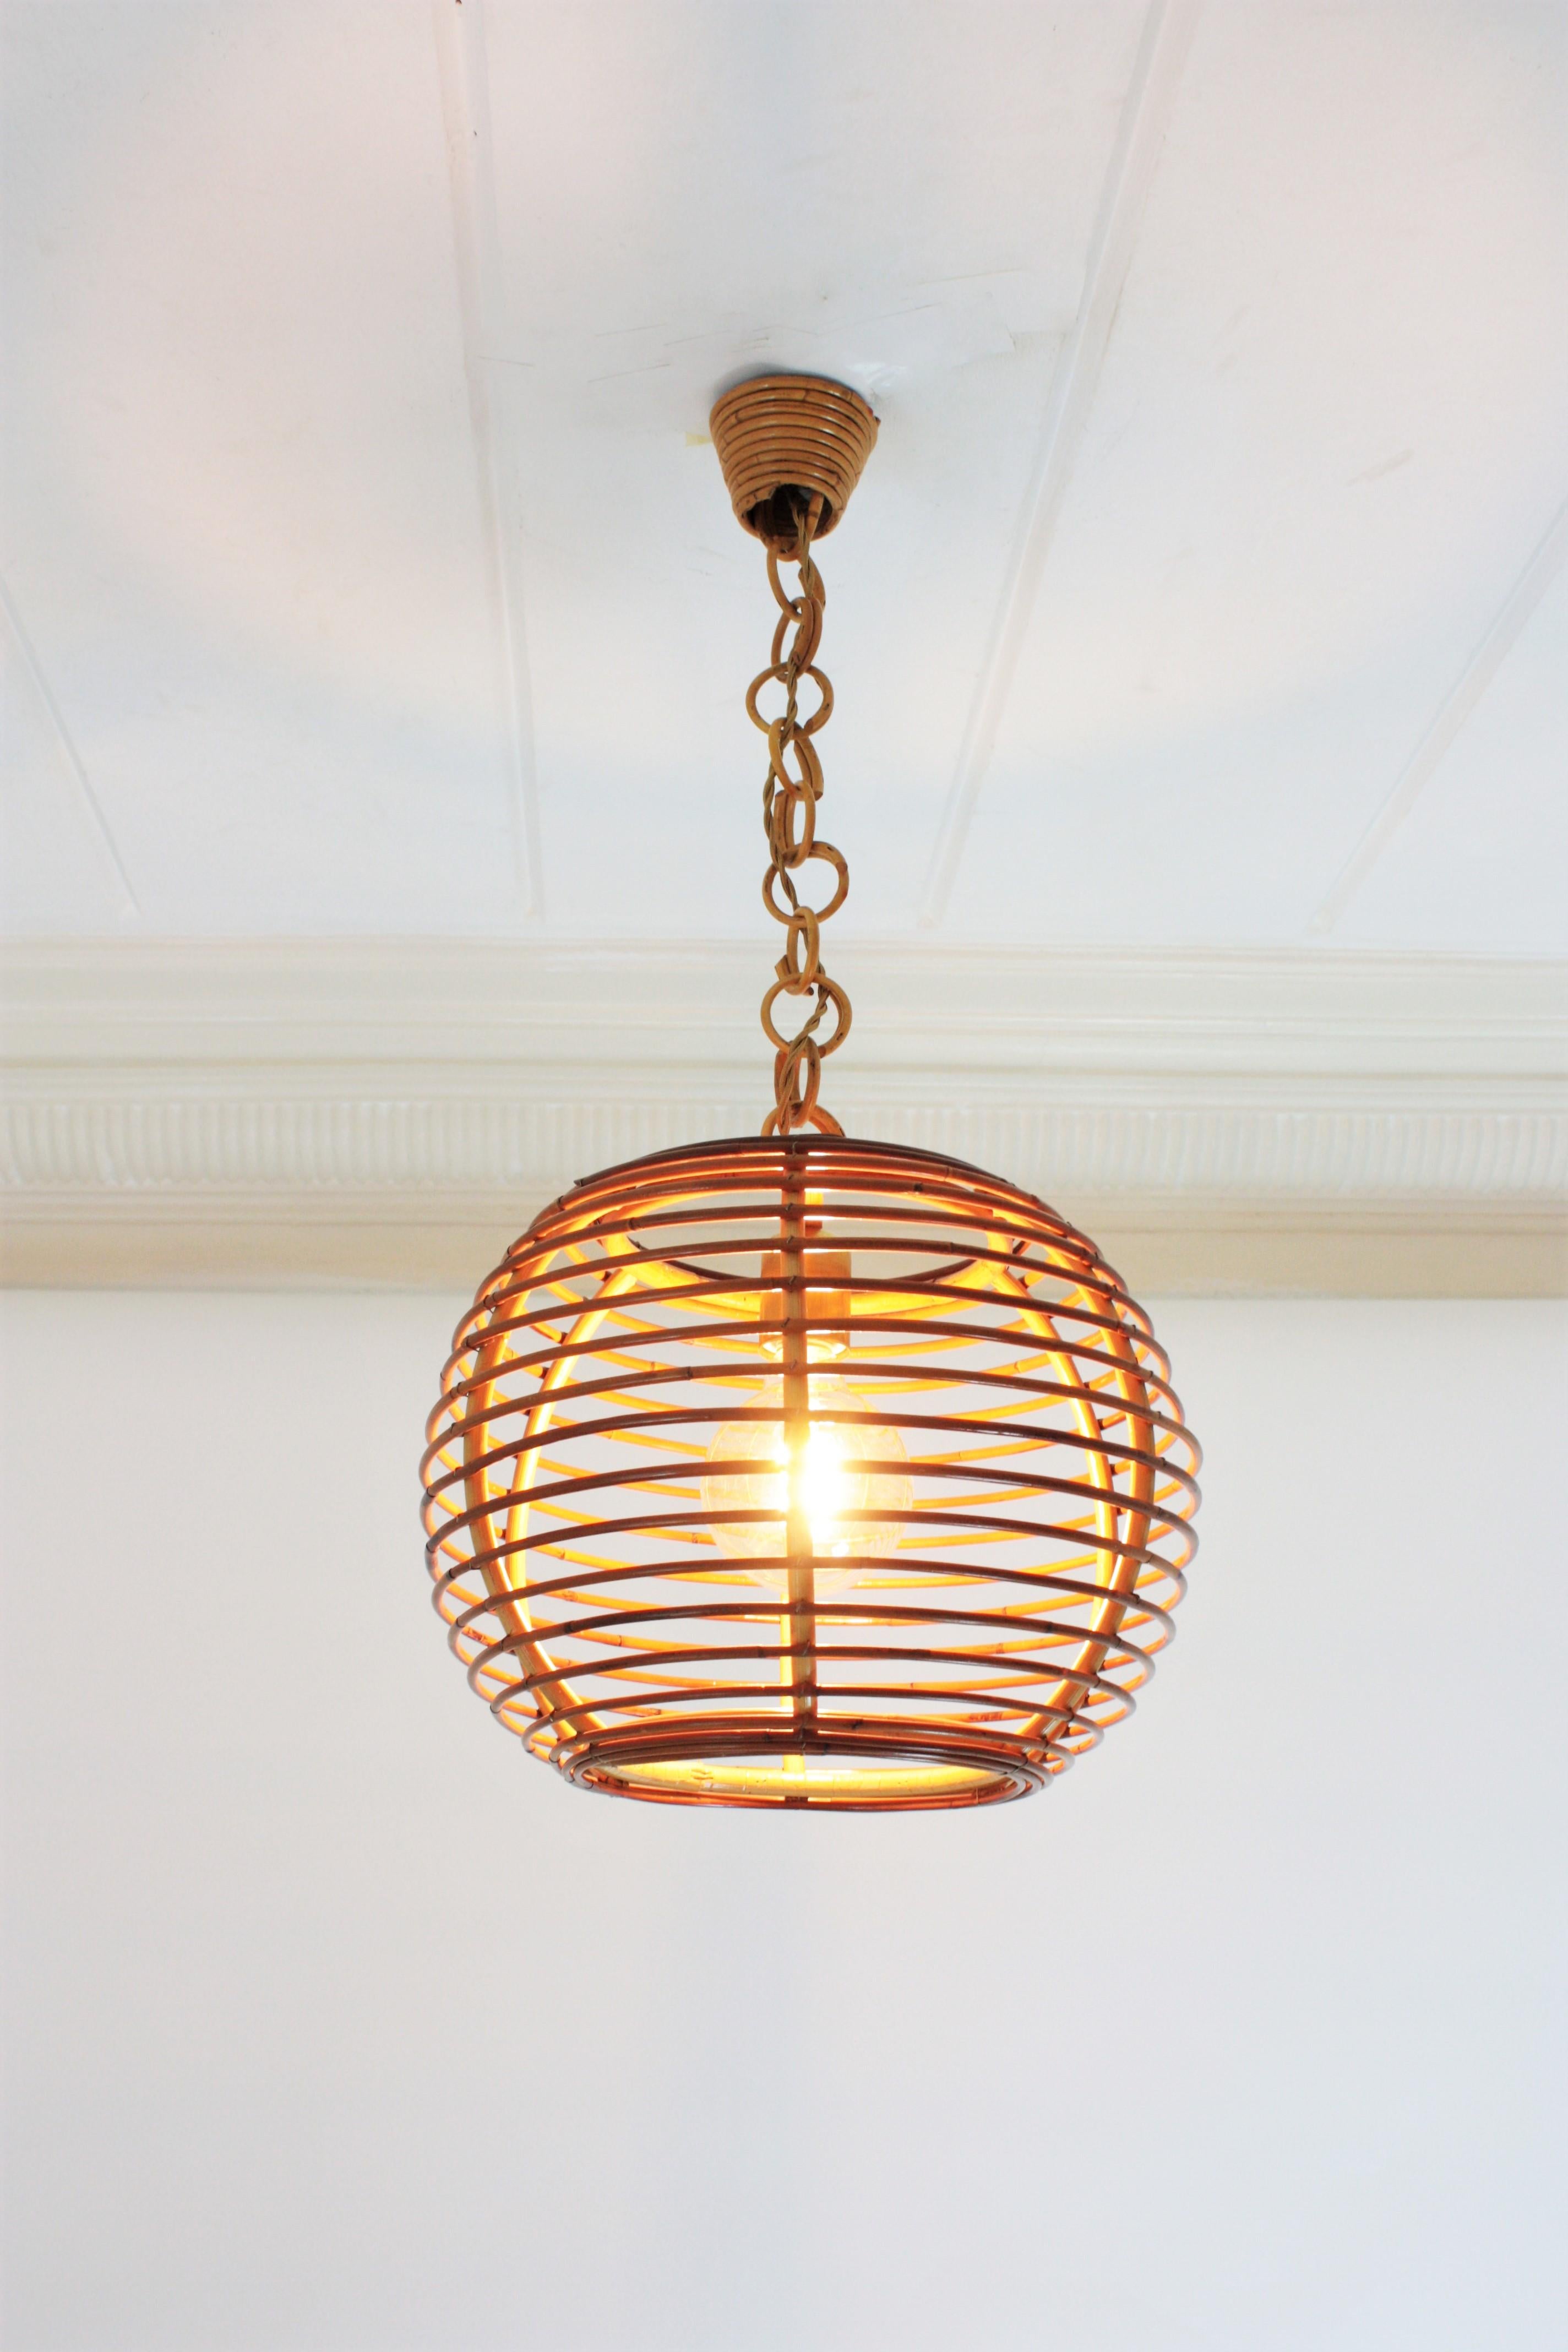 Hand-Crafted Rattan Globe Pendant or Hanging Light, Spain, 1960s For Sale